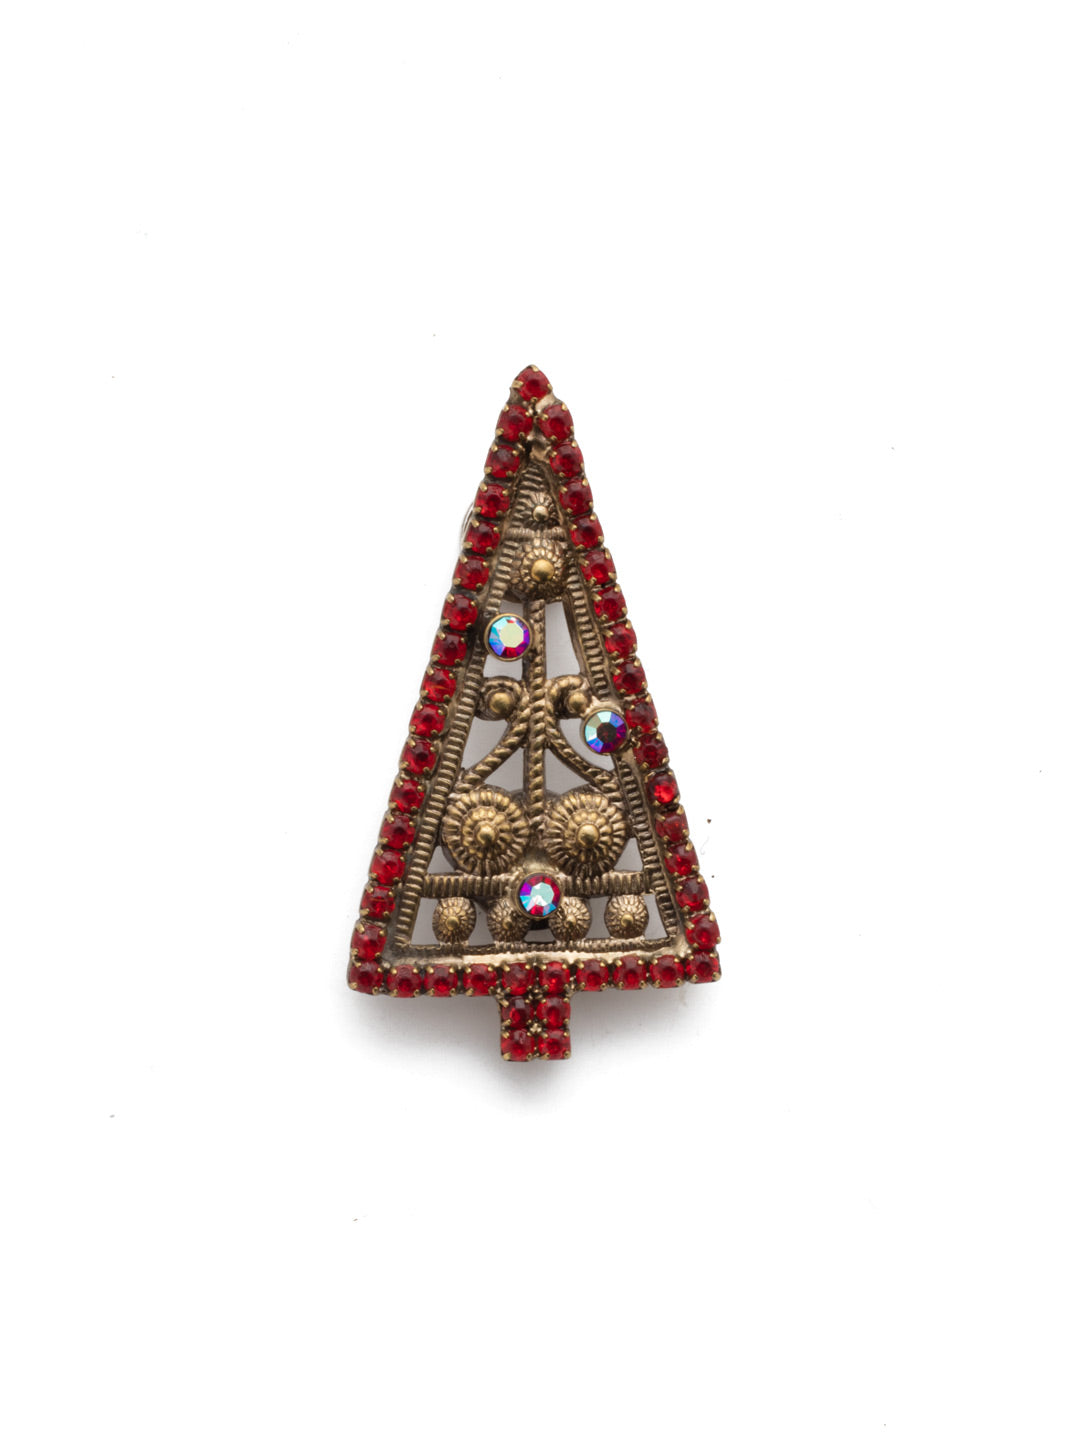 Spruce Magnetic Charm - CHM7AGRDS - <p>The Spruce Magnetic Charm will make you feel jolly when bag, blazer, dress or refrigerator. The charm is covered in mulipule colored crystals that resemble a christmas tree. From Sorrelli's Red Siam collection in our Antique Gold-tone finish.</p>